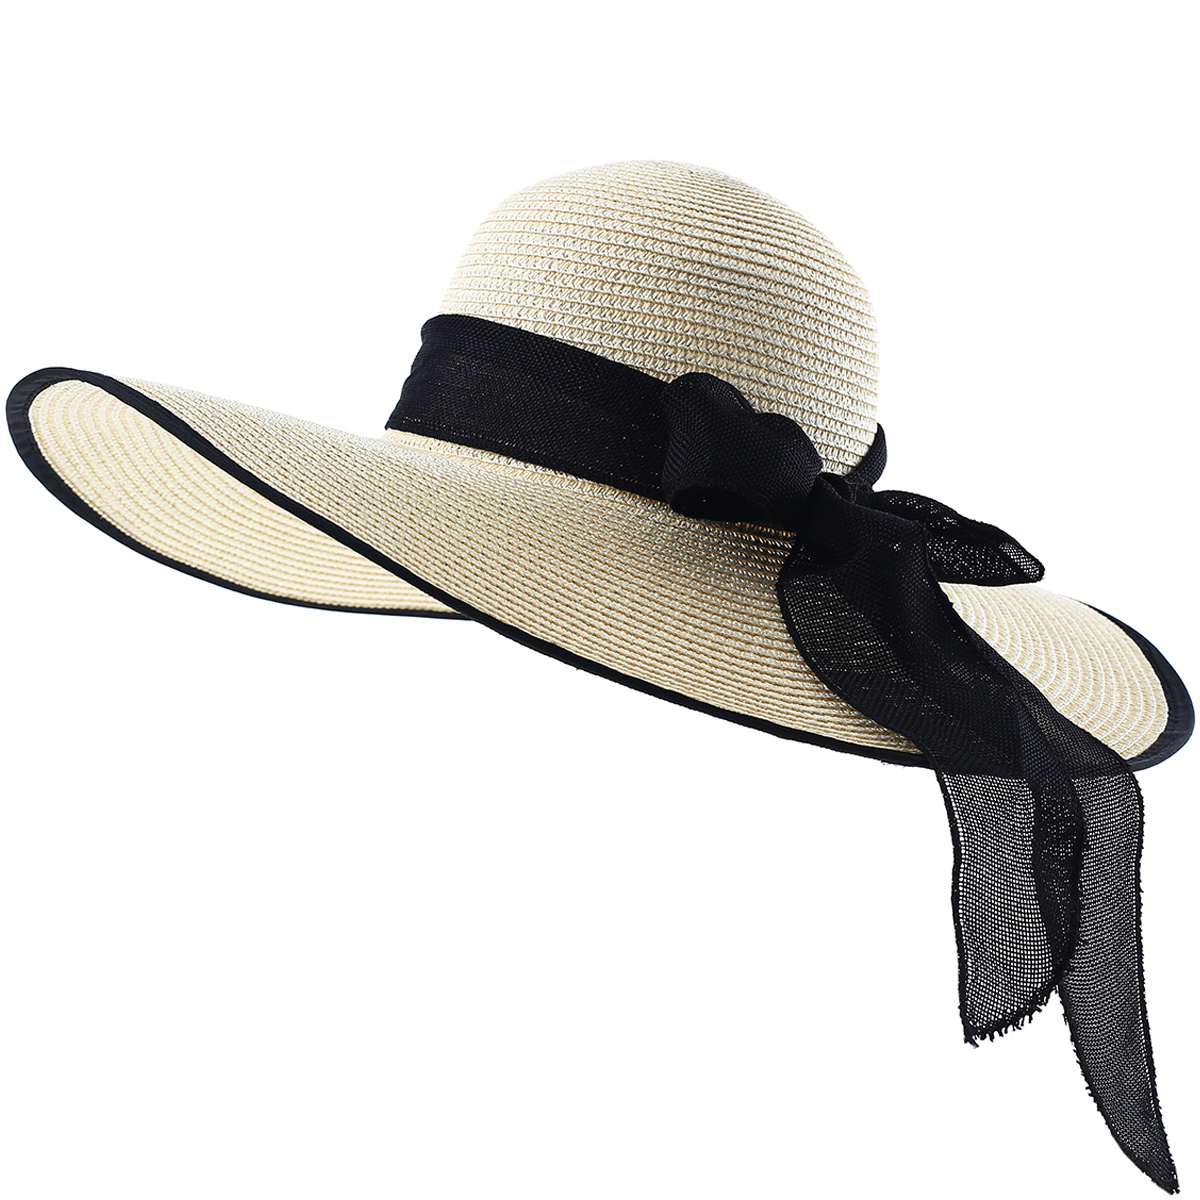 Peicees Sun Hat for Women Wide Brim Visors Hat for Outdoor UV Protection Summer Floppy Straw Hat for Beach//Travel//Hiking